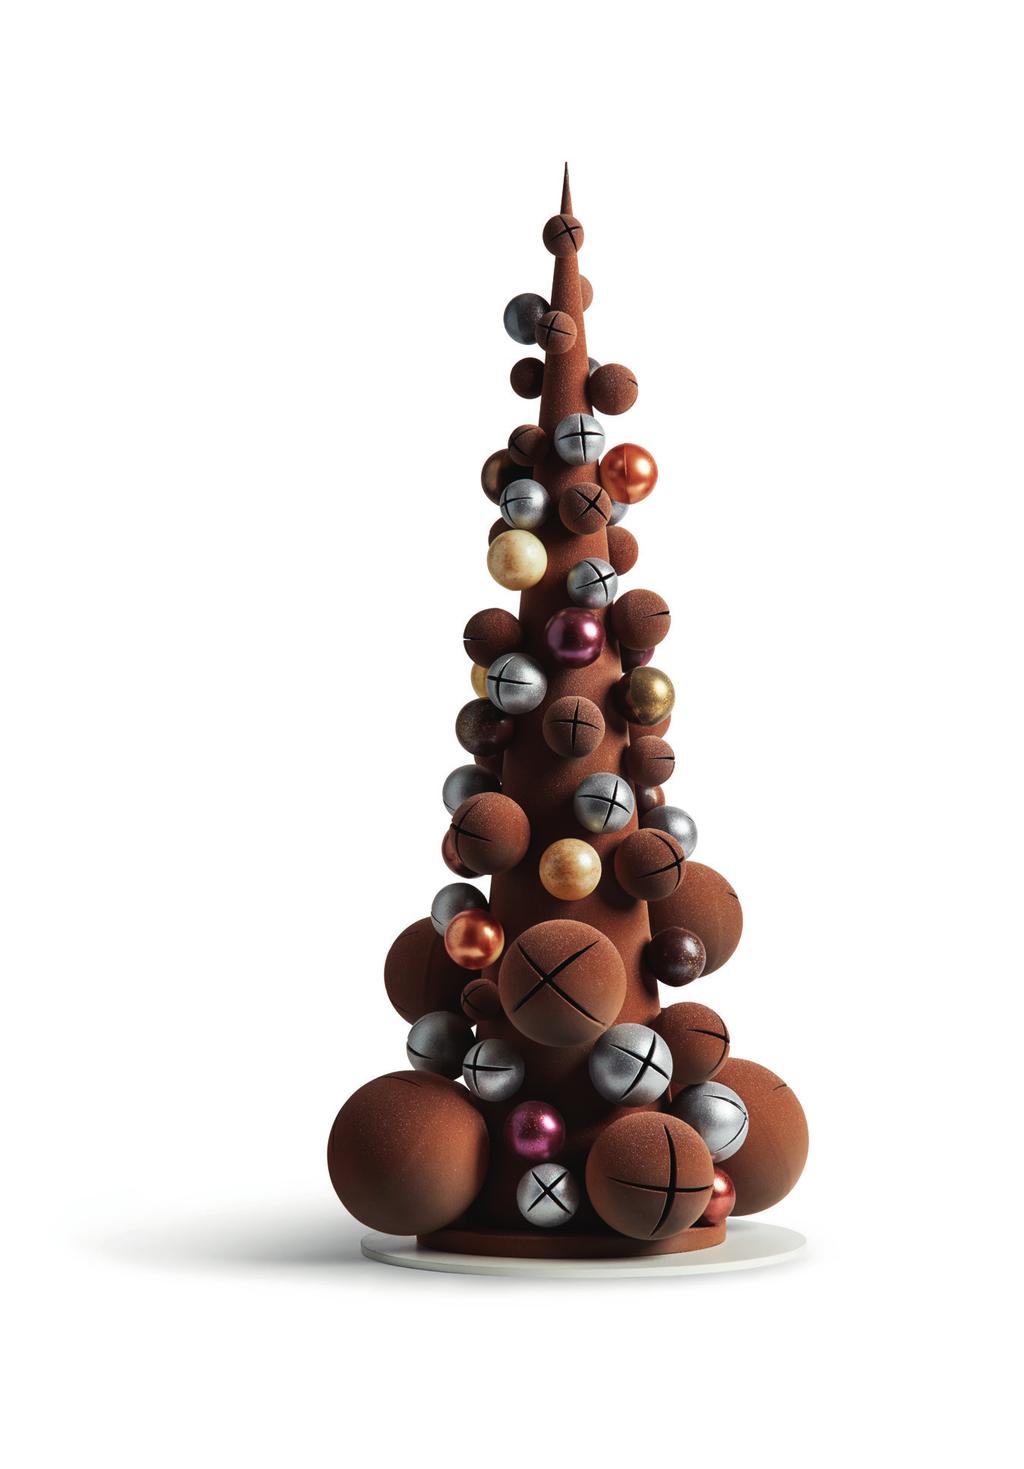 Spectacular creations that blend artisanal skill and creative virtuosity. Waking Dream chrismtas tree - limited edition The collection s Christmas tree is reinvented in this stunning luxury version.